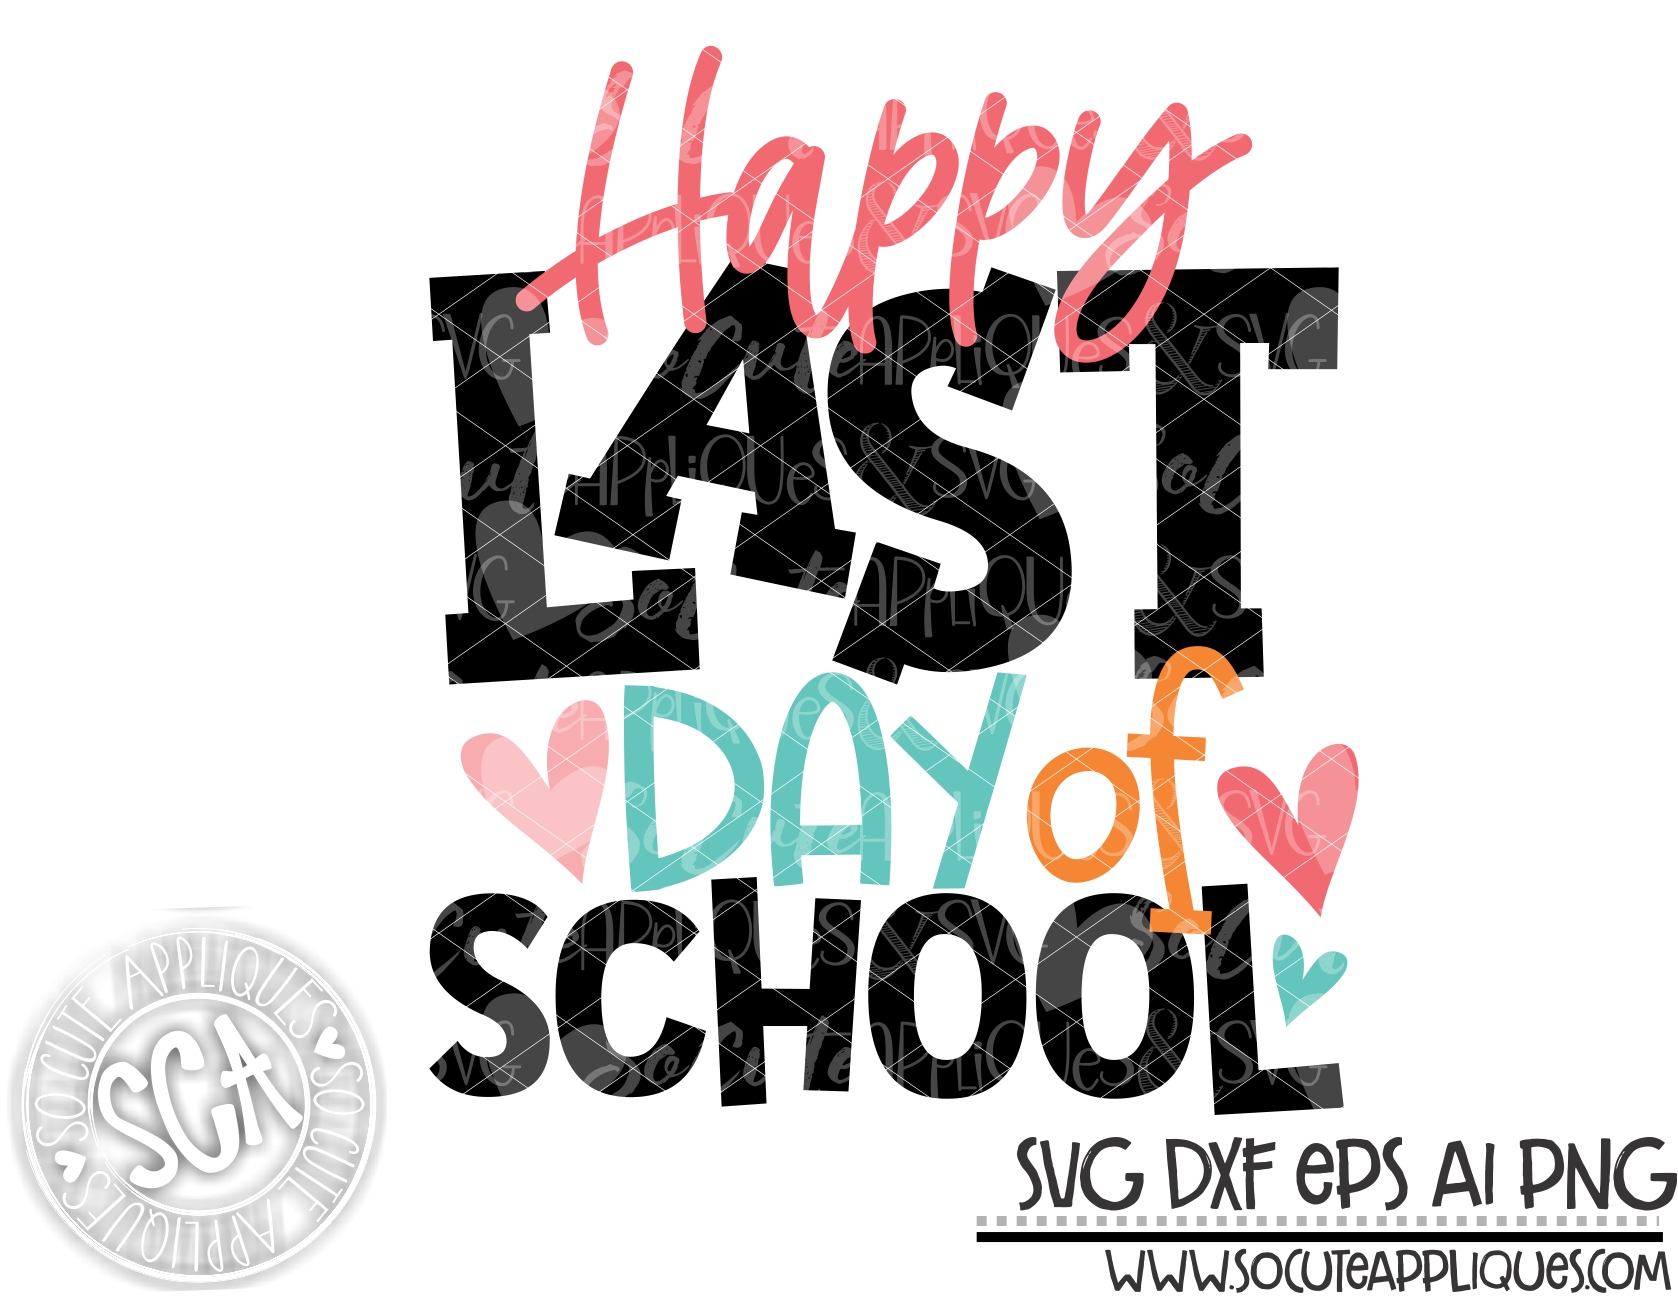 Happy Last Day of School Svg End of School Svg Summer Time 